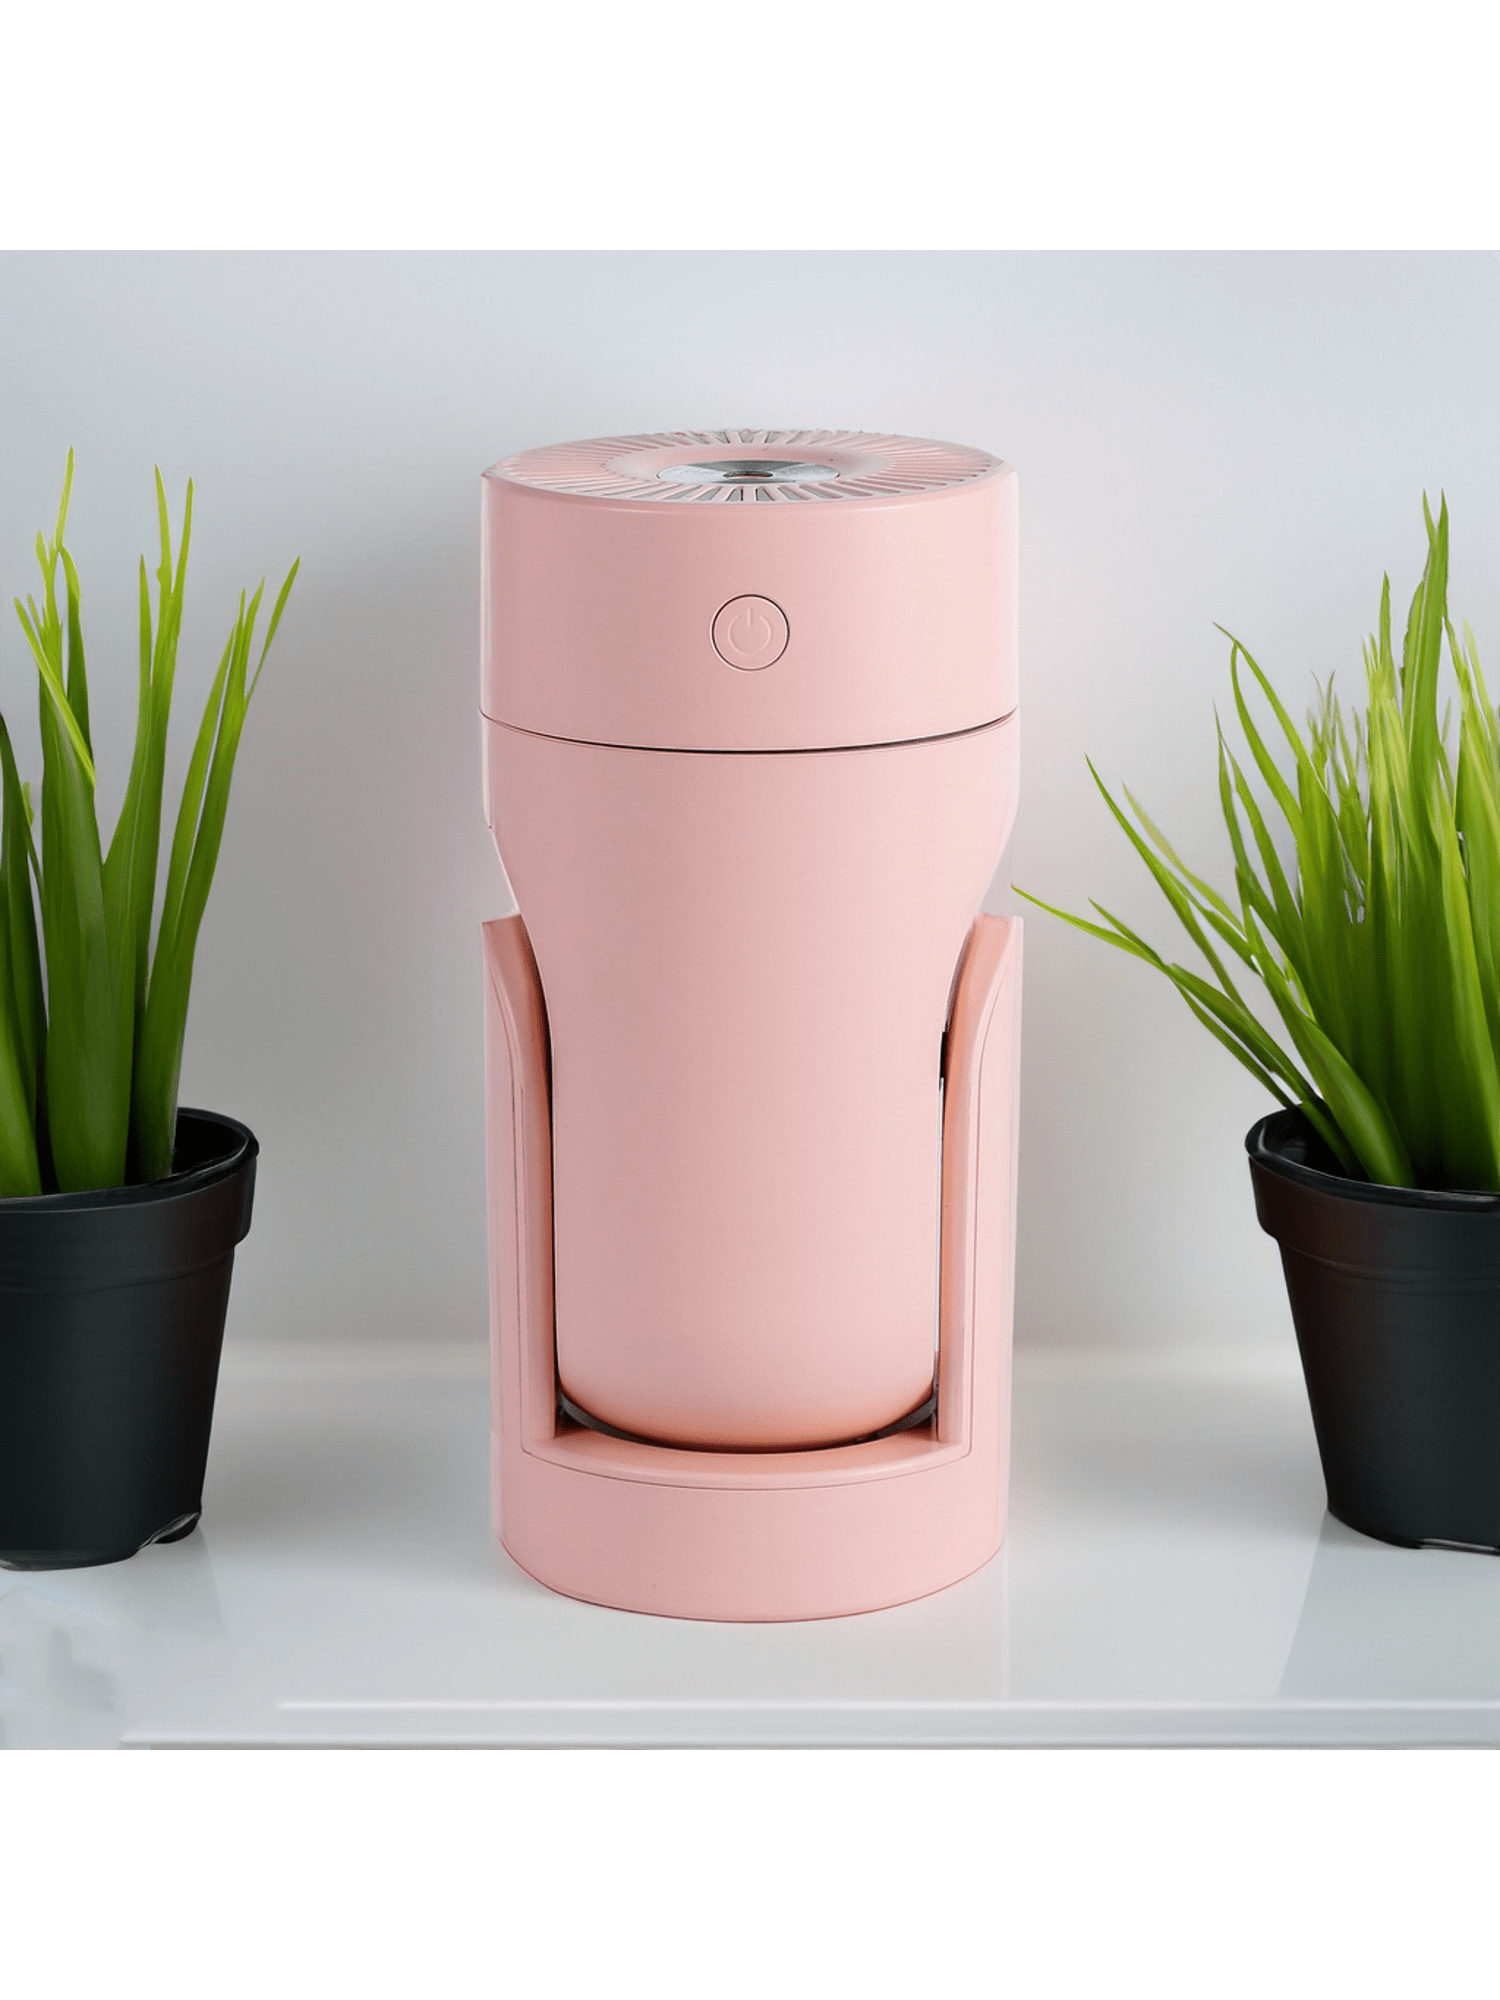 1pc Portable ABS Humidifier, Modern Pink Rechargeable Desktop Atomizer Hydrating Device For Office